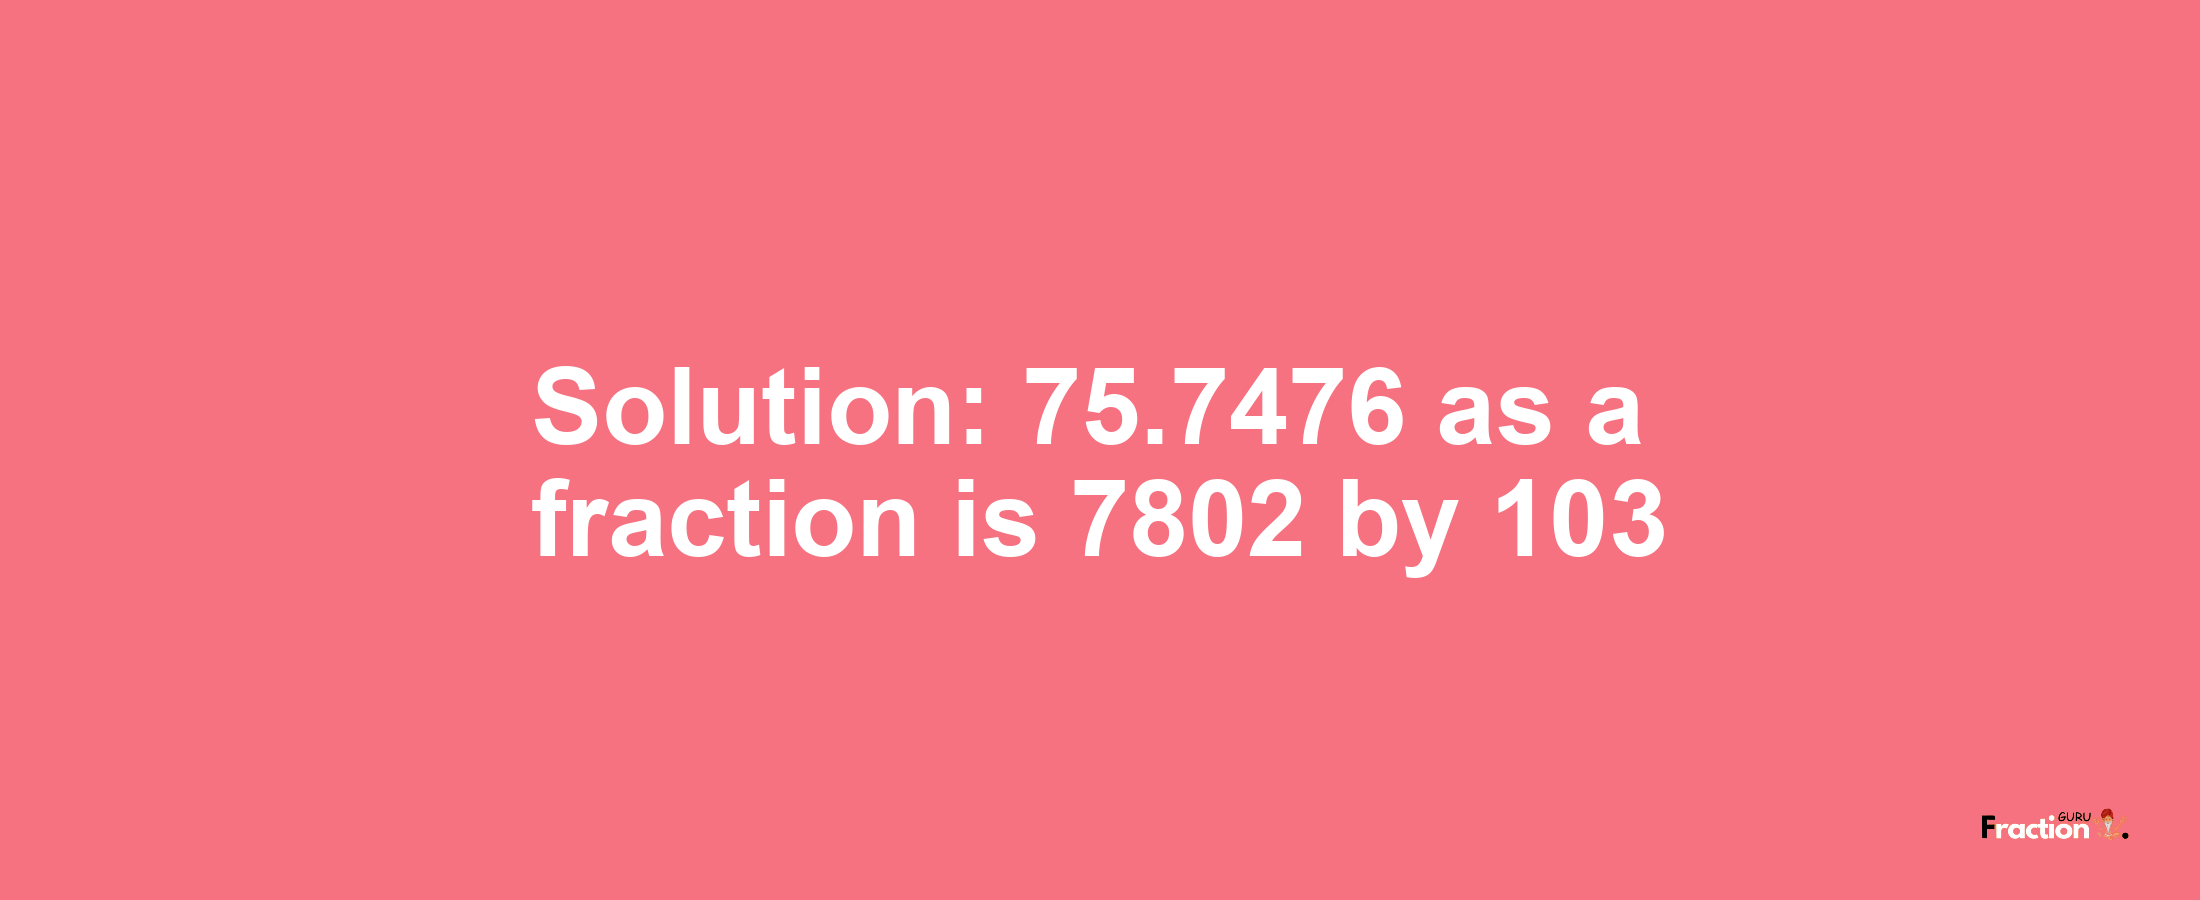 Solution:75.7476 as a fraction is 7802/103